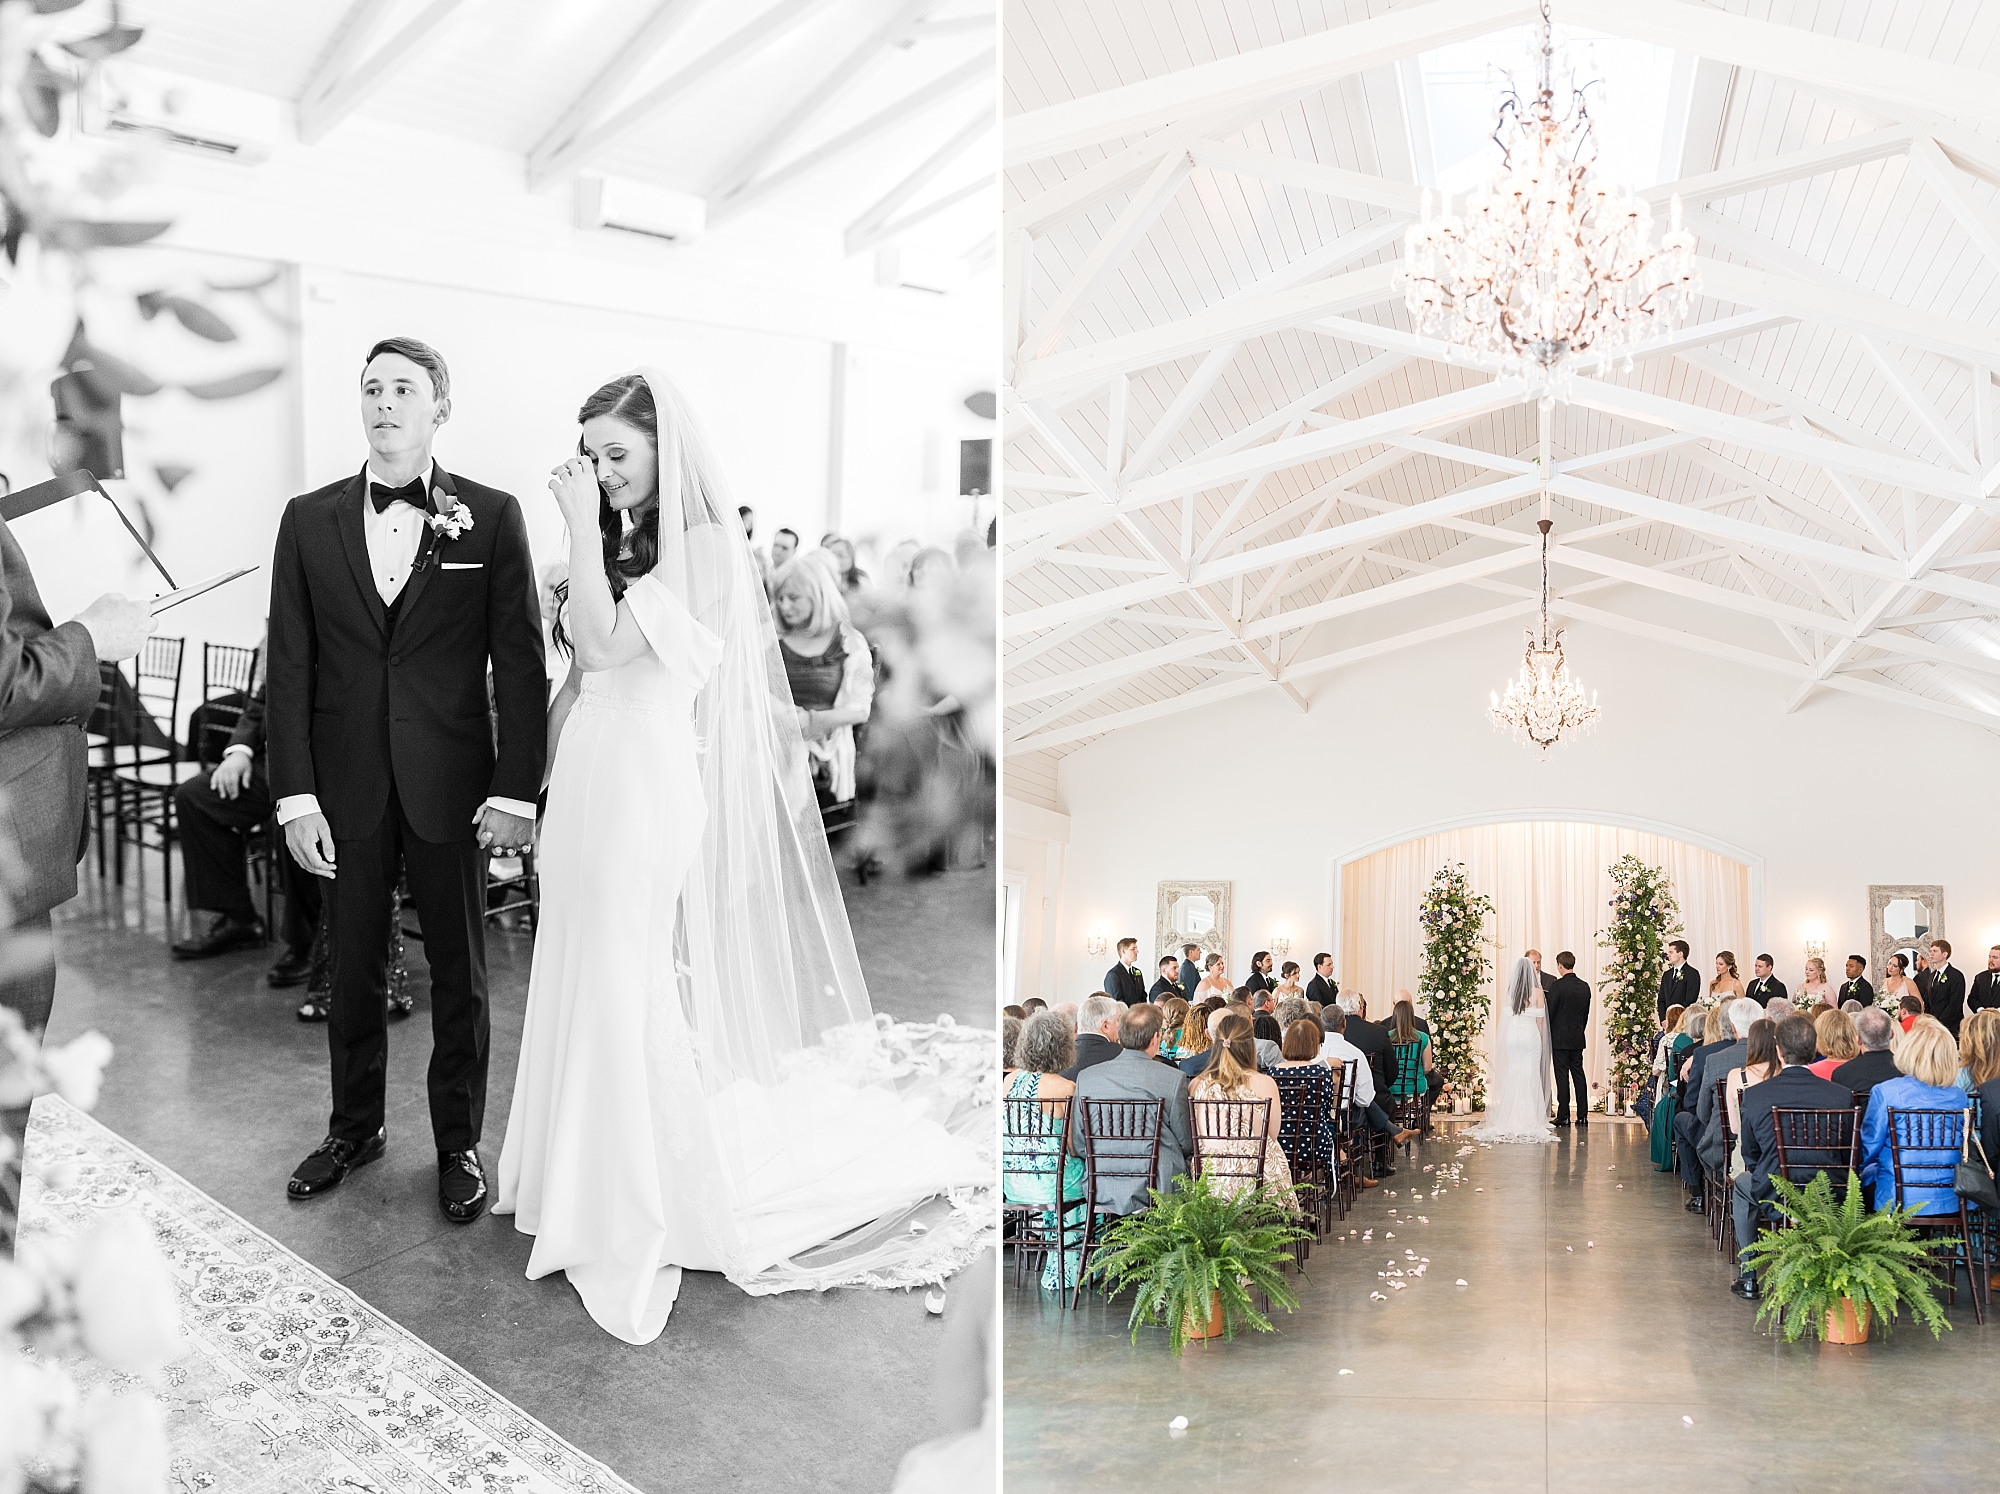 Indoor ceremony at the Carriage house | Merrimon Wynne Wedding | Sarah Hinckley Photography | Raleigh NC Wedding Photographer